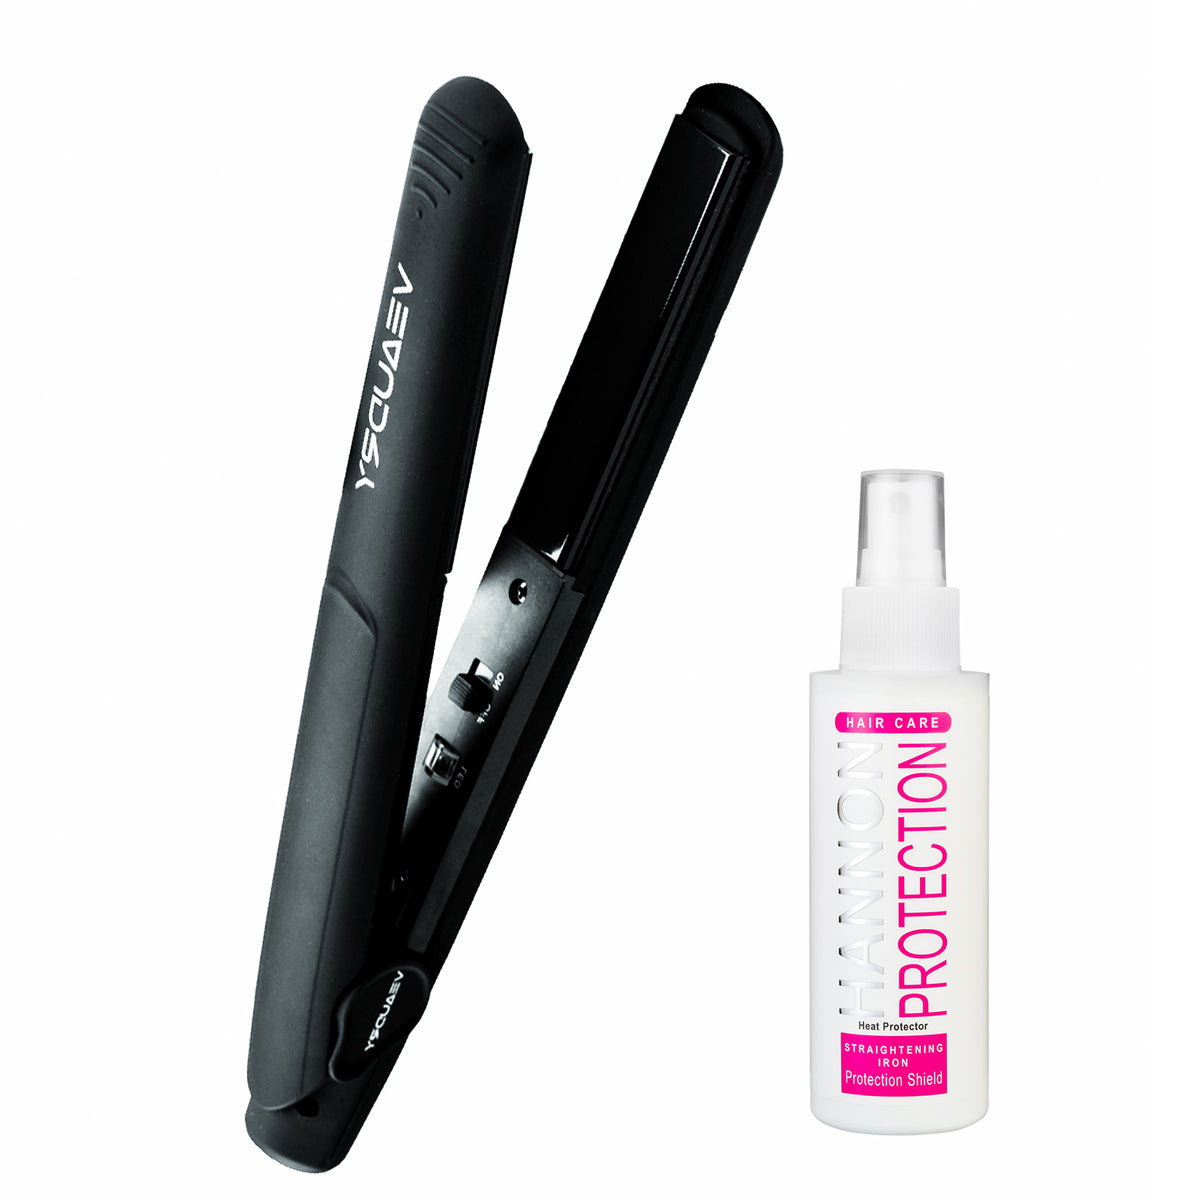 Veaudry myStyler & Straightening Iron Protection Shield